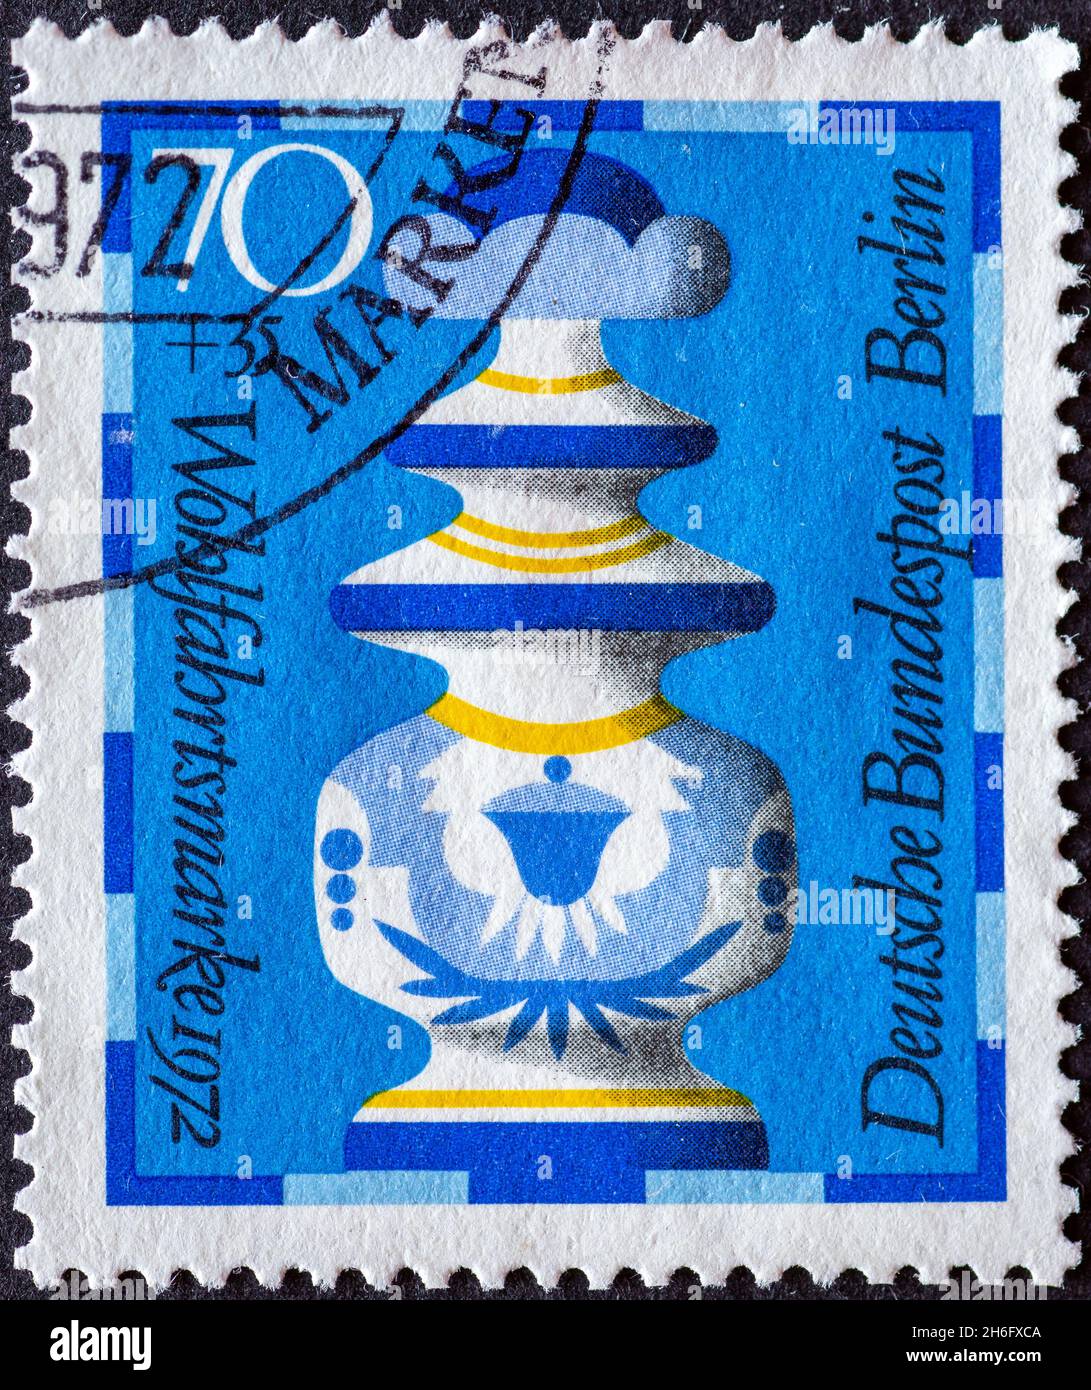 GERMANY, Berlin - CIRCA 1972: a postage stamp from Germany, Berlin showing a charity postal stamp from 1972 chess pieces from the Fayencemanufaktur he Stock Photo